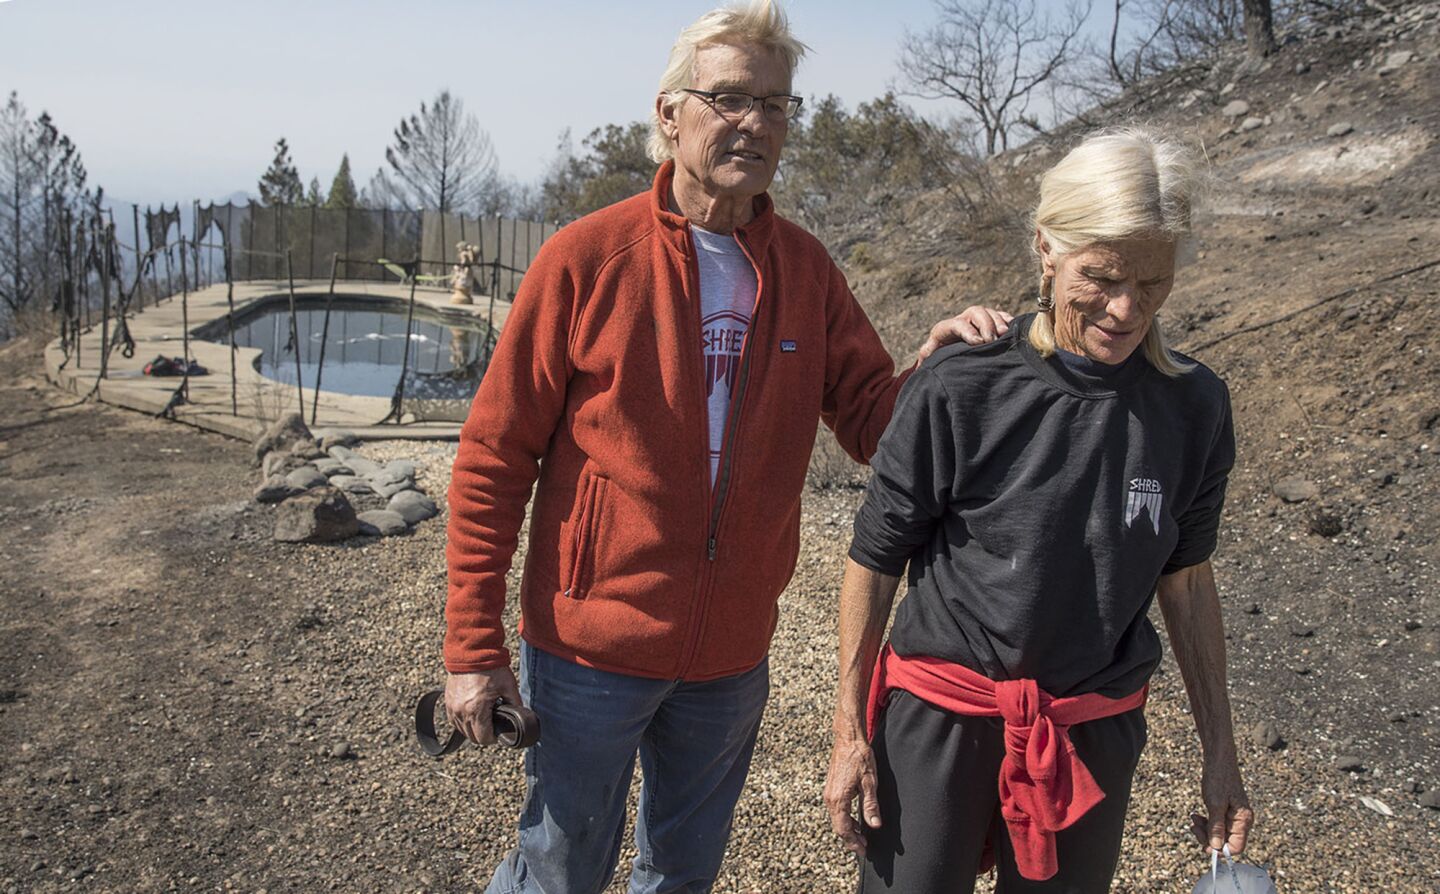 John and Jan Pascoe survived the firestorm by running out of their home and into their neighbors' swimming pool in Santa Rosa.